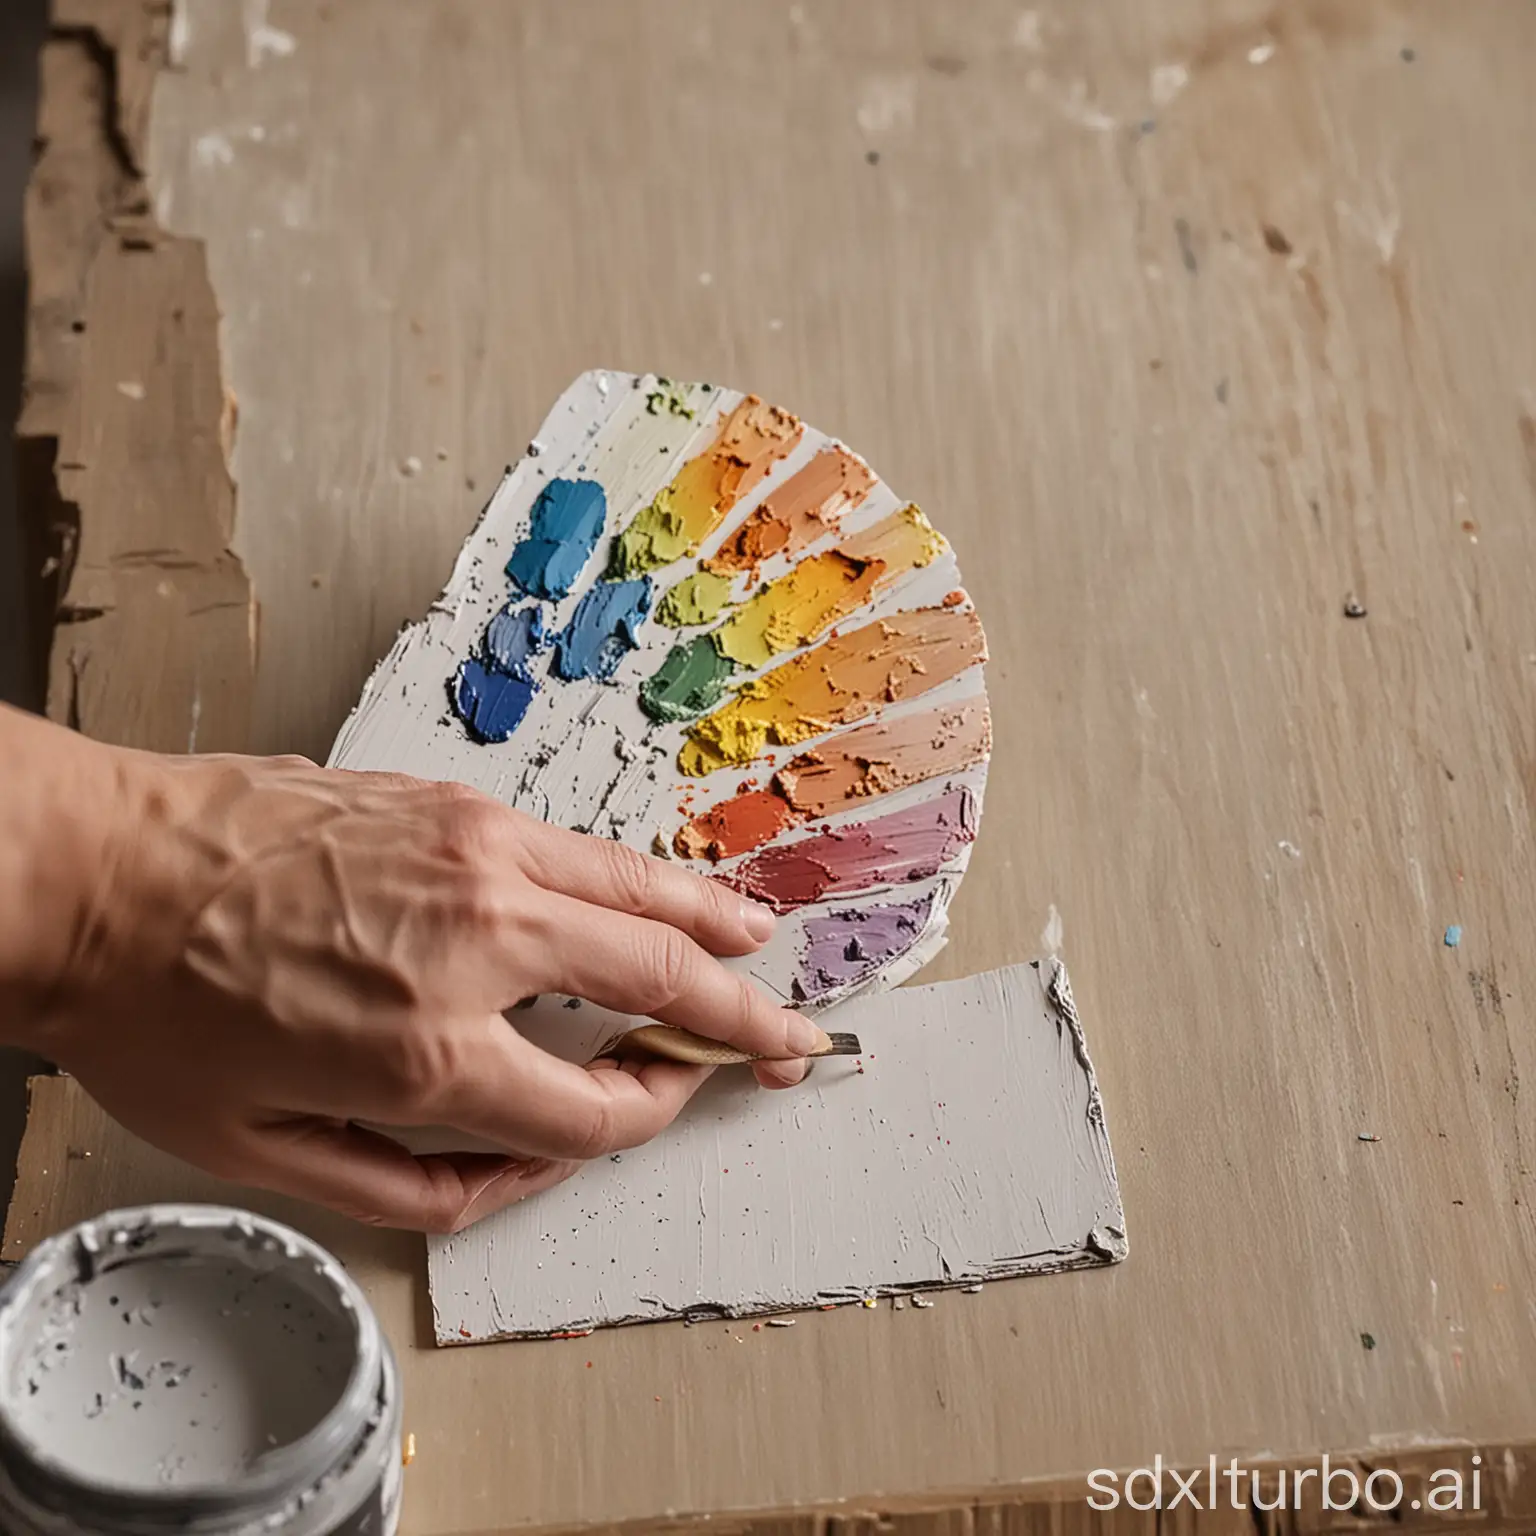 A hand holding a paintbrush, with a colorful paint palette in the background. The hand is about to paint on a blank canvas.